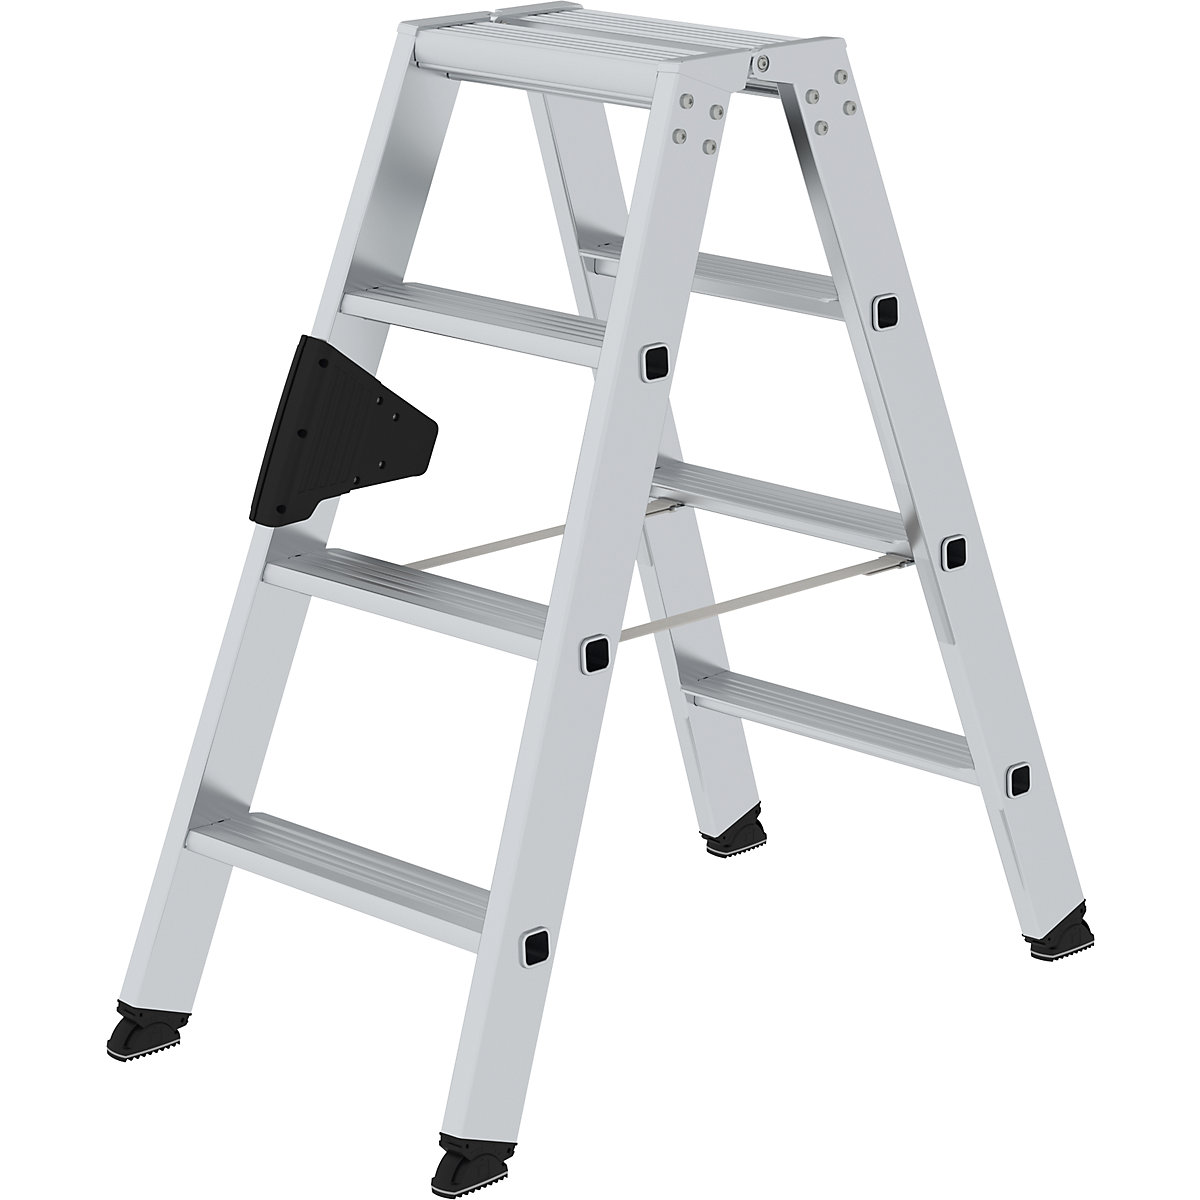 Step ladder, double sided – MUNK, comfort model with ergo pad®, 2x4 steps-10